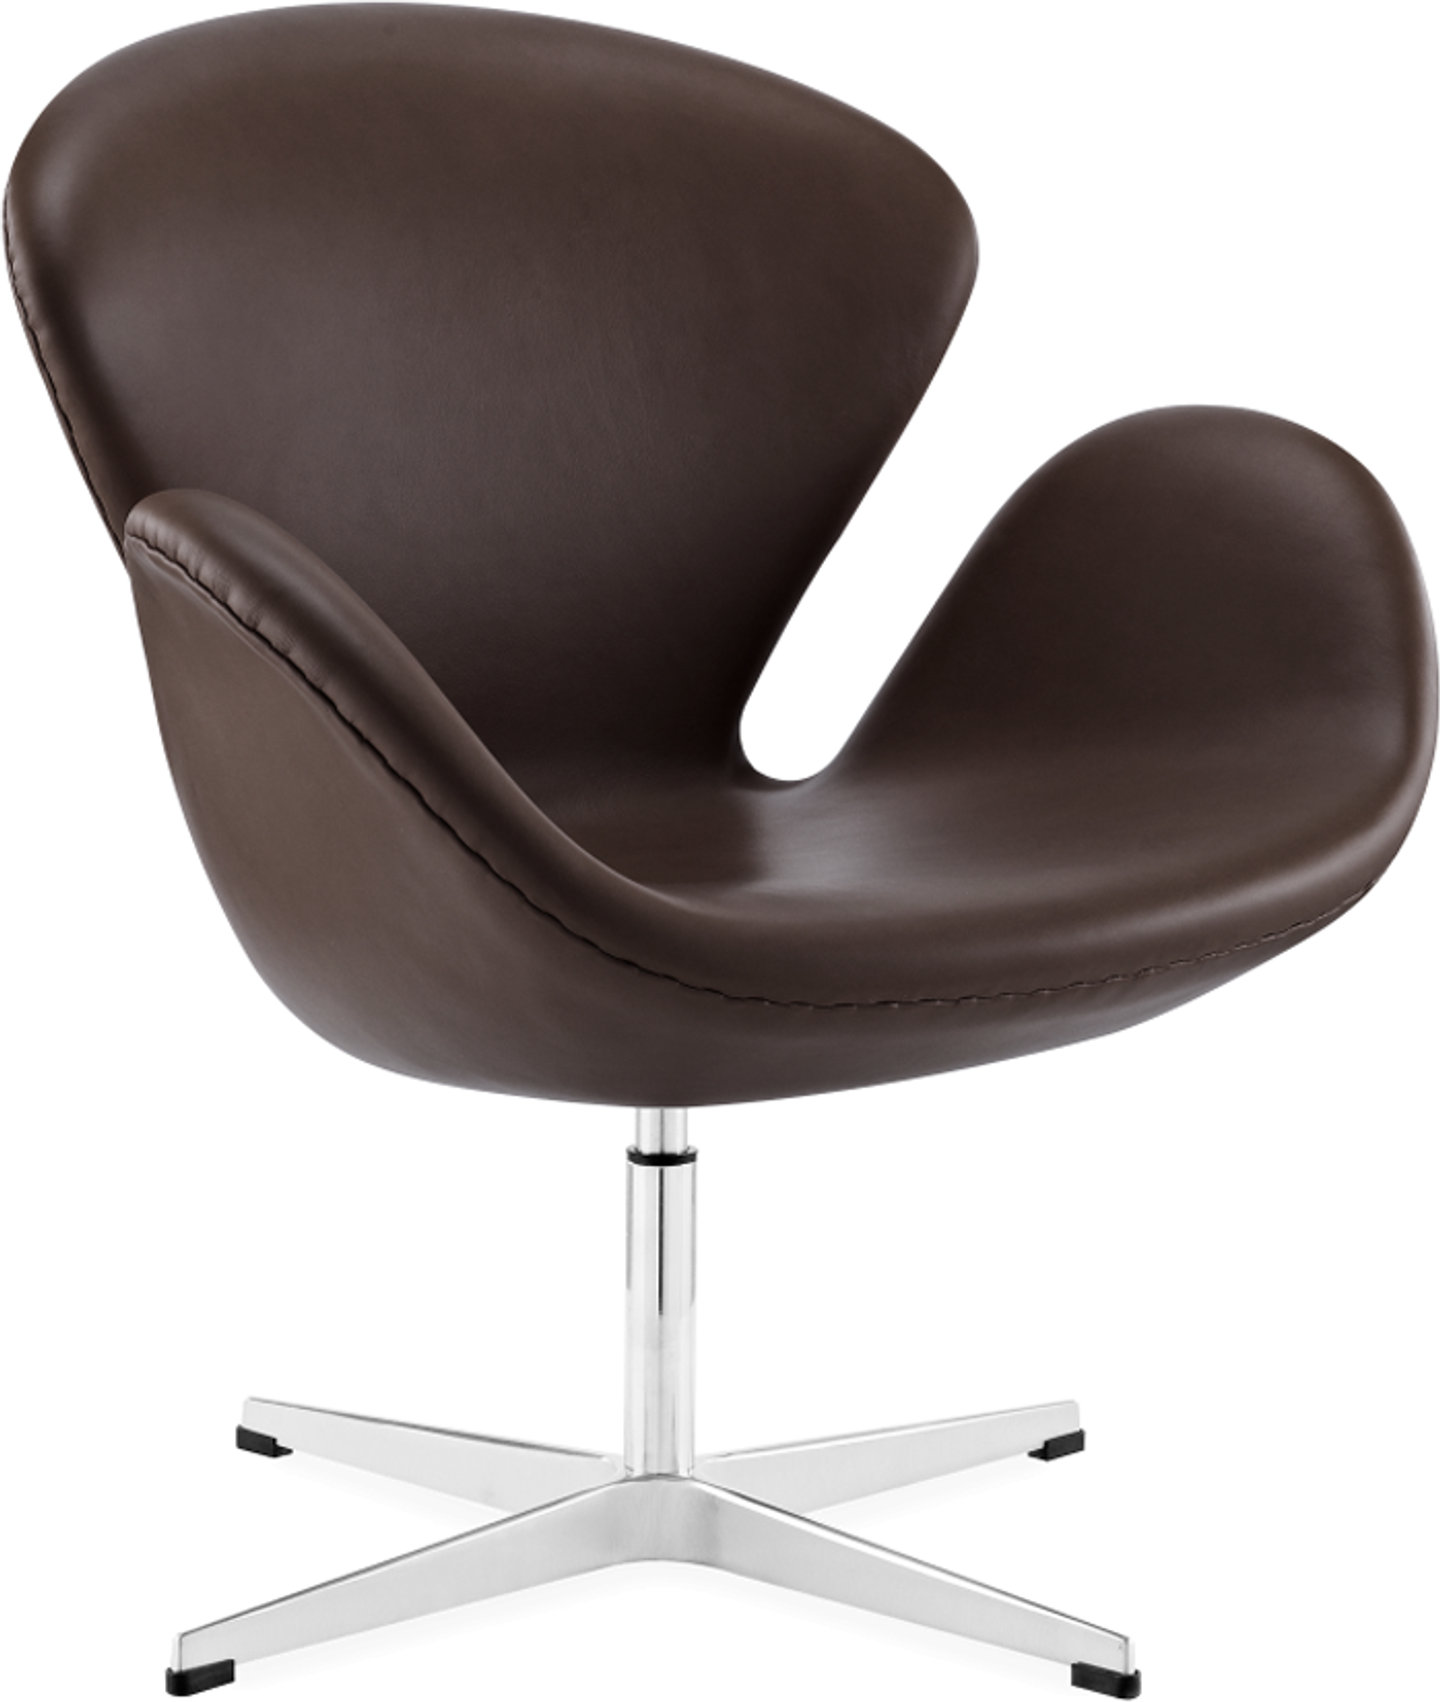 Le fauteuil du cygne Premium Leather/Without piping/Mocha image.